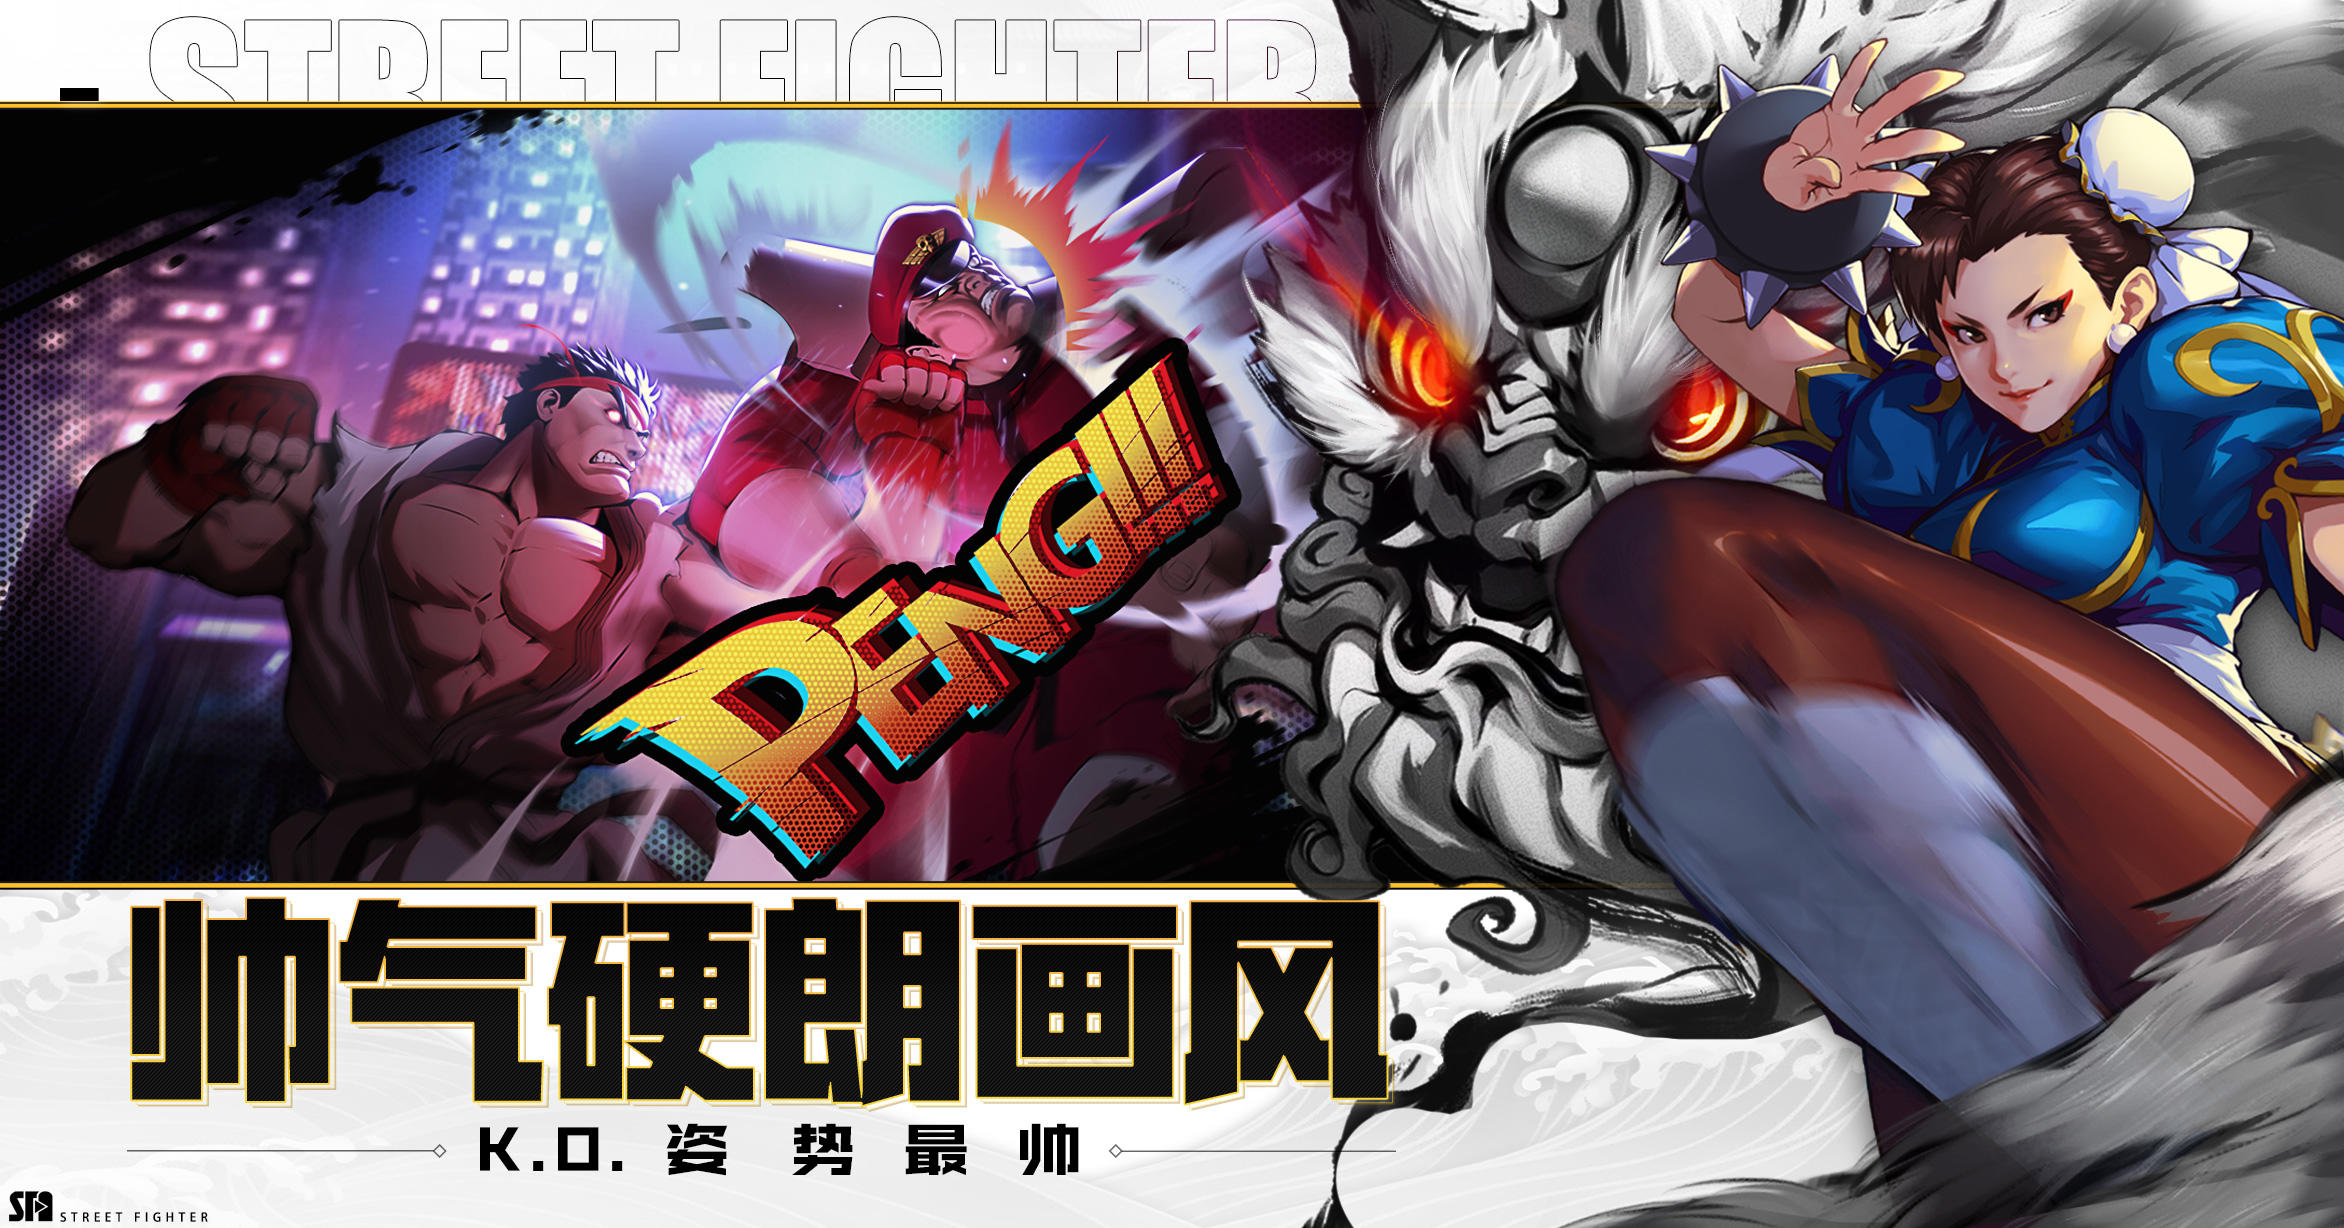 Street Fighter: Duel is a mobile RPG coming this month